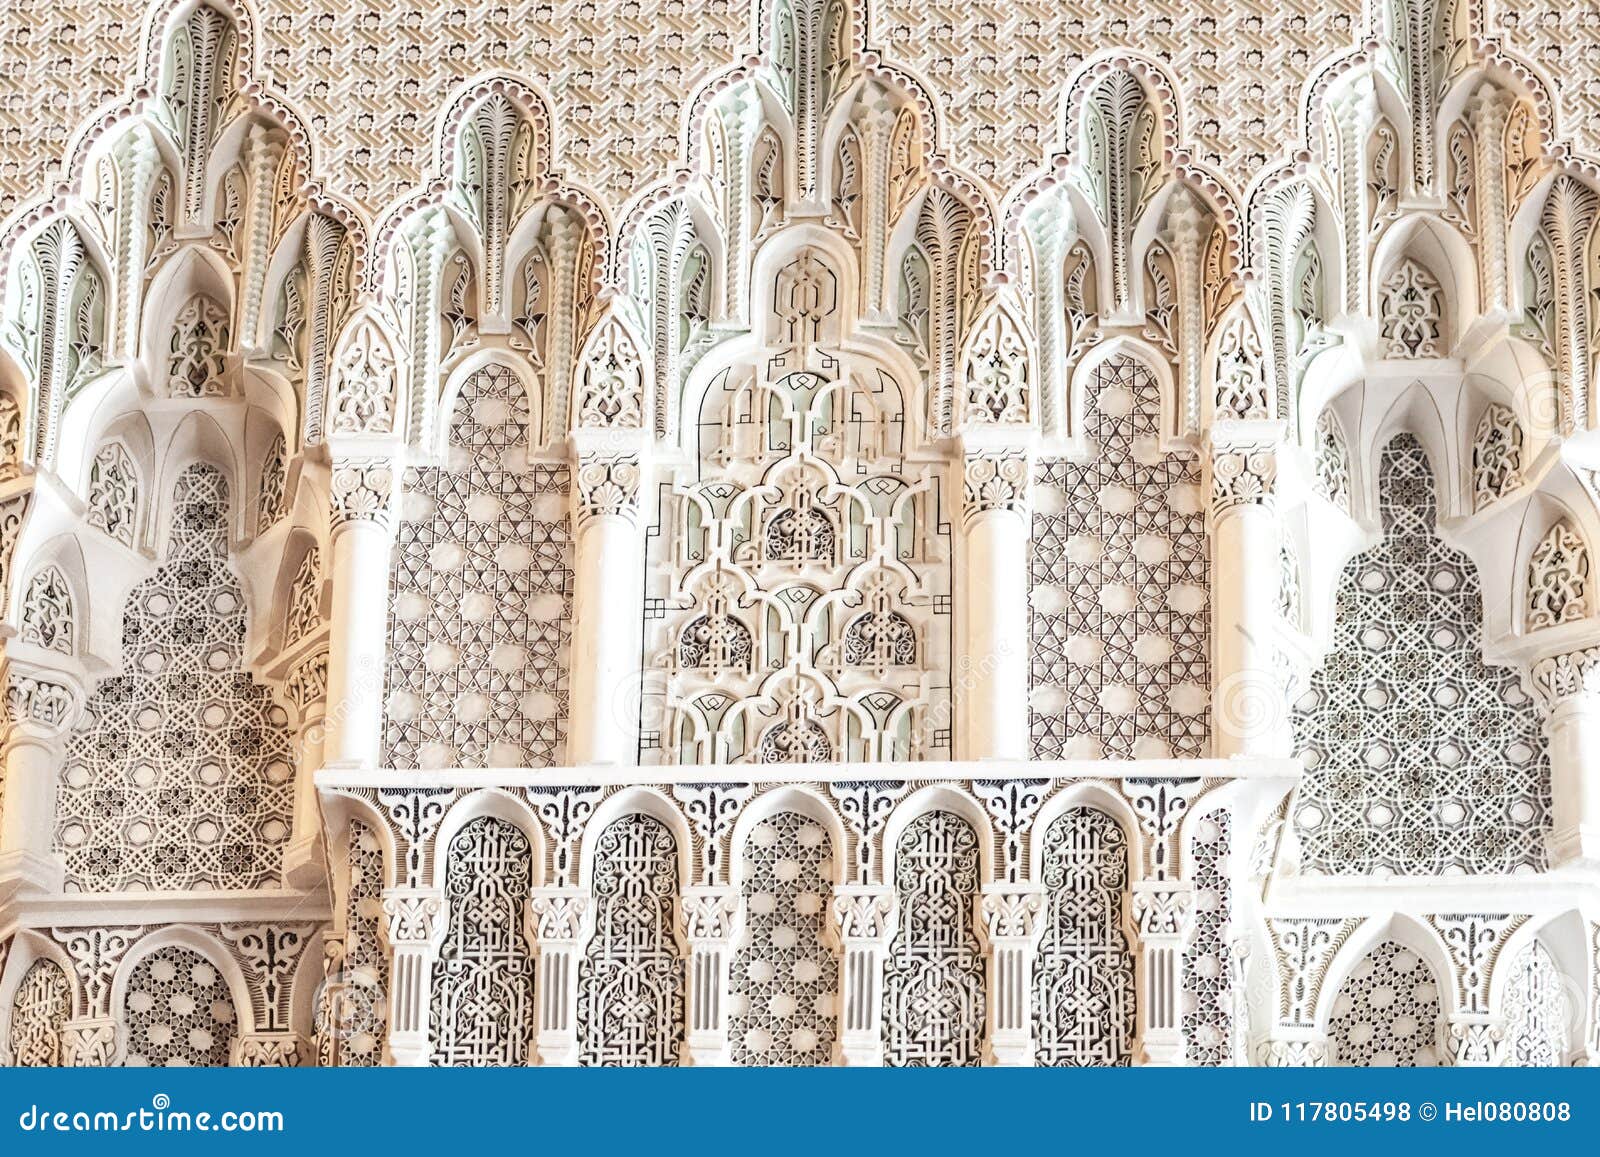 geometric patterns in marble: details king hassan ii mosque, casablanca, morocco